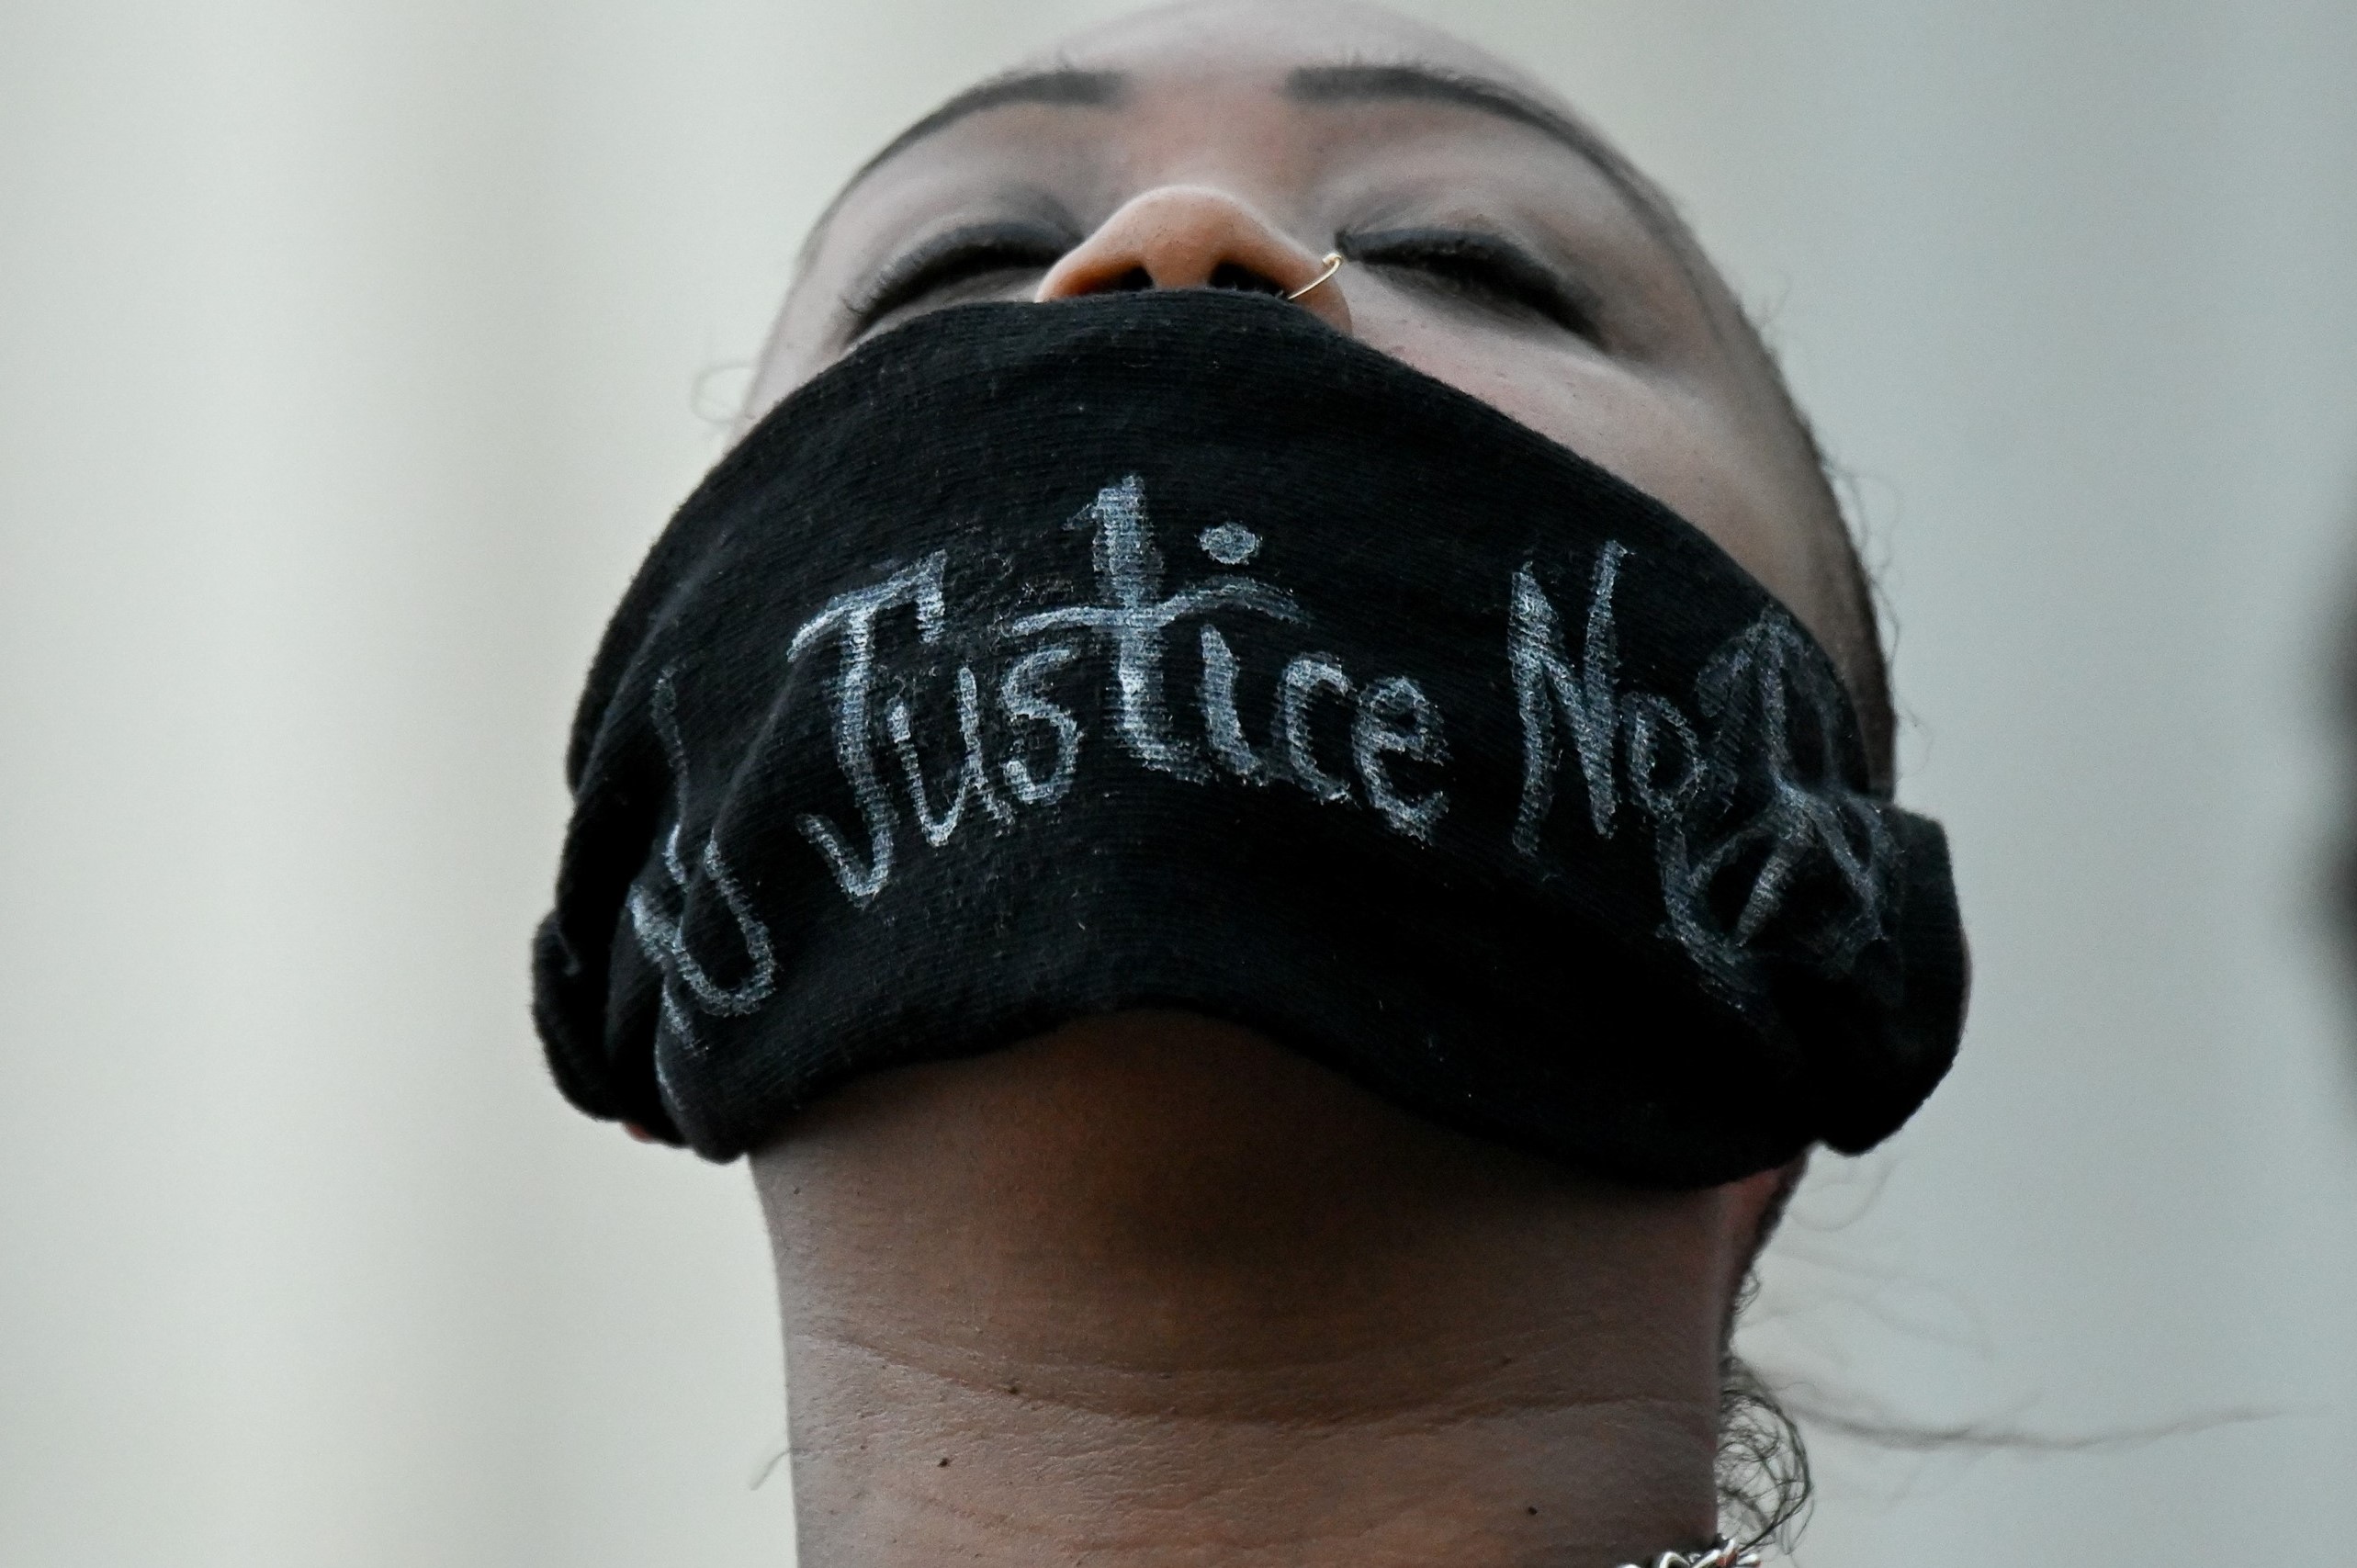 Shenita Binns closes her eyes during a rally against racial inequality in the aftermath of the death in Minneapolis police custody of George Floyd, at the Lincoln Memorial in Washington, U.S. June